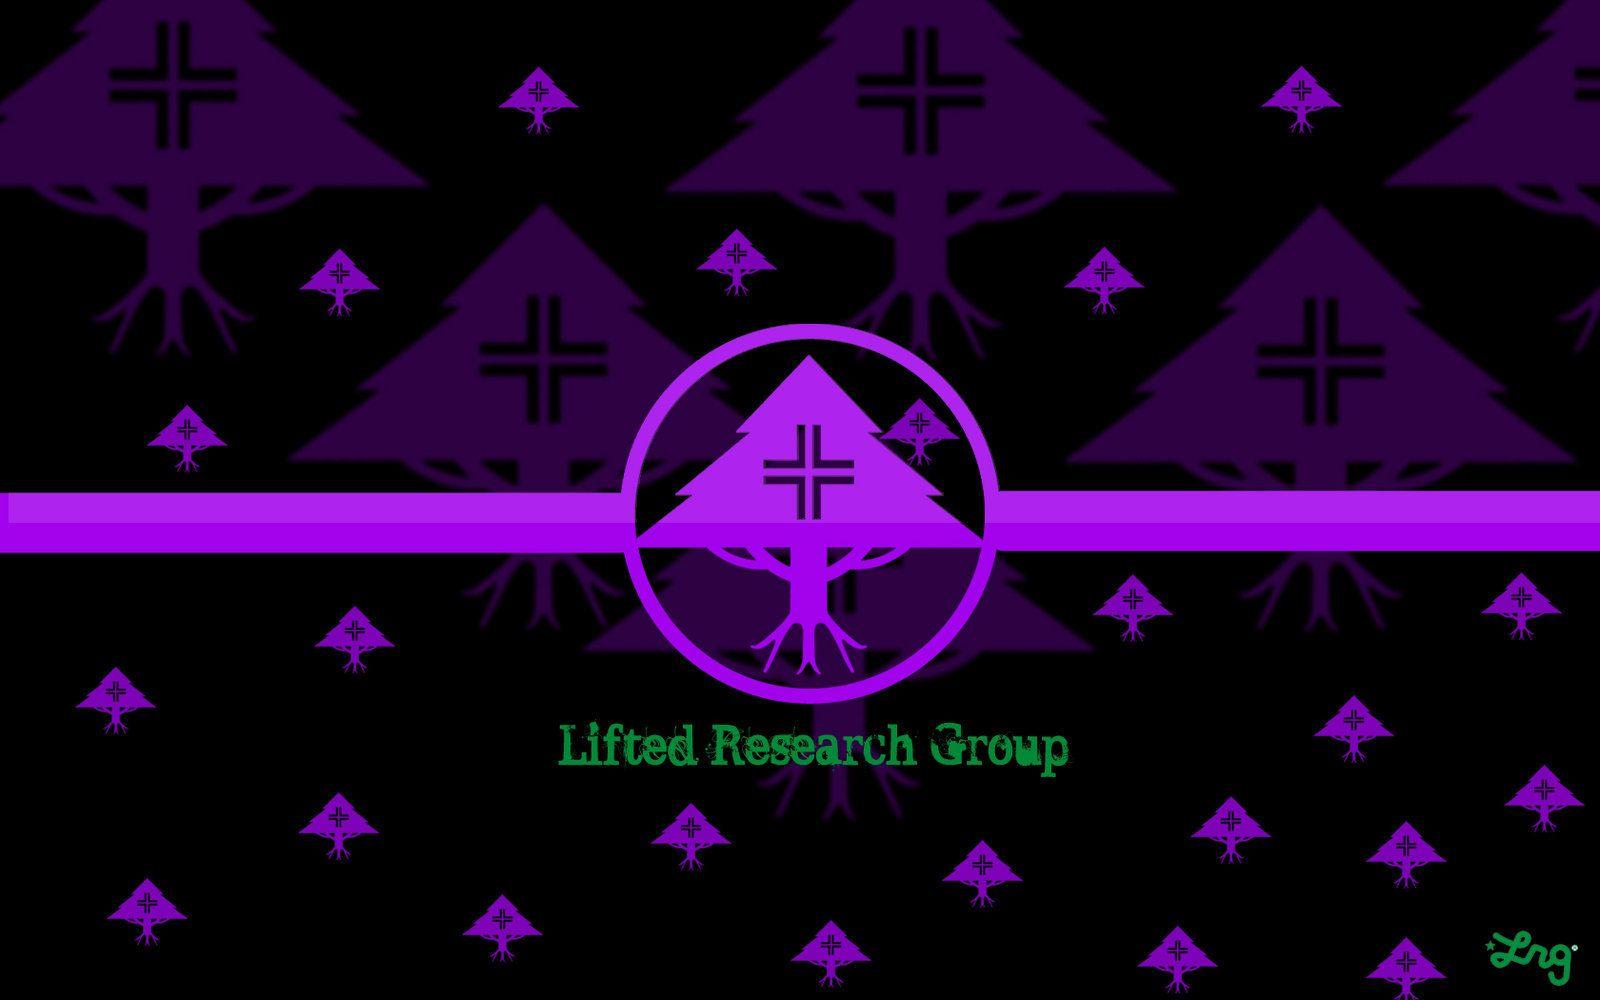 Lifted Research Group Logo - College scholarship essay writing. Professional Academic Help Online